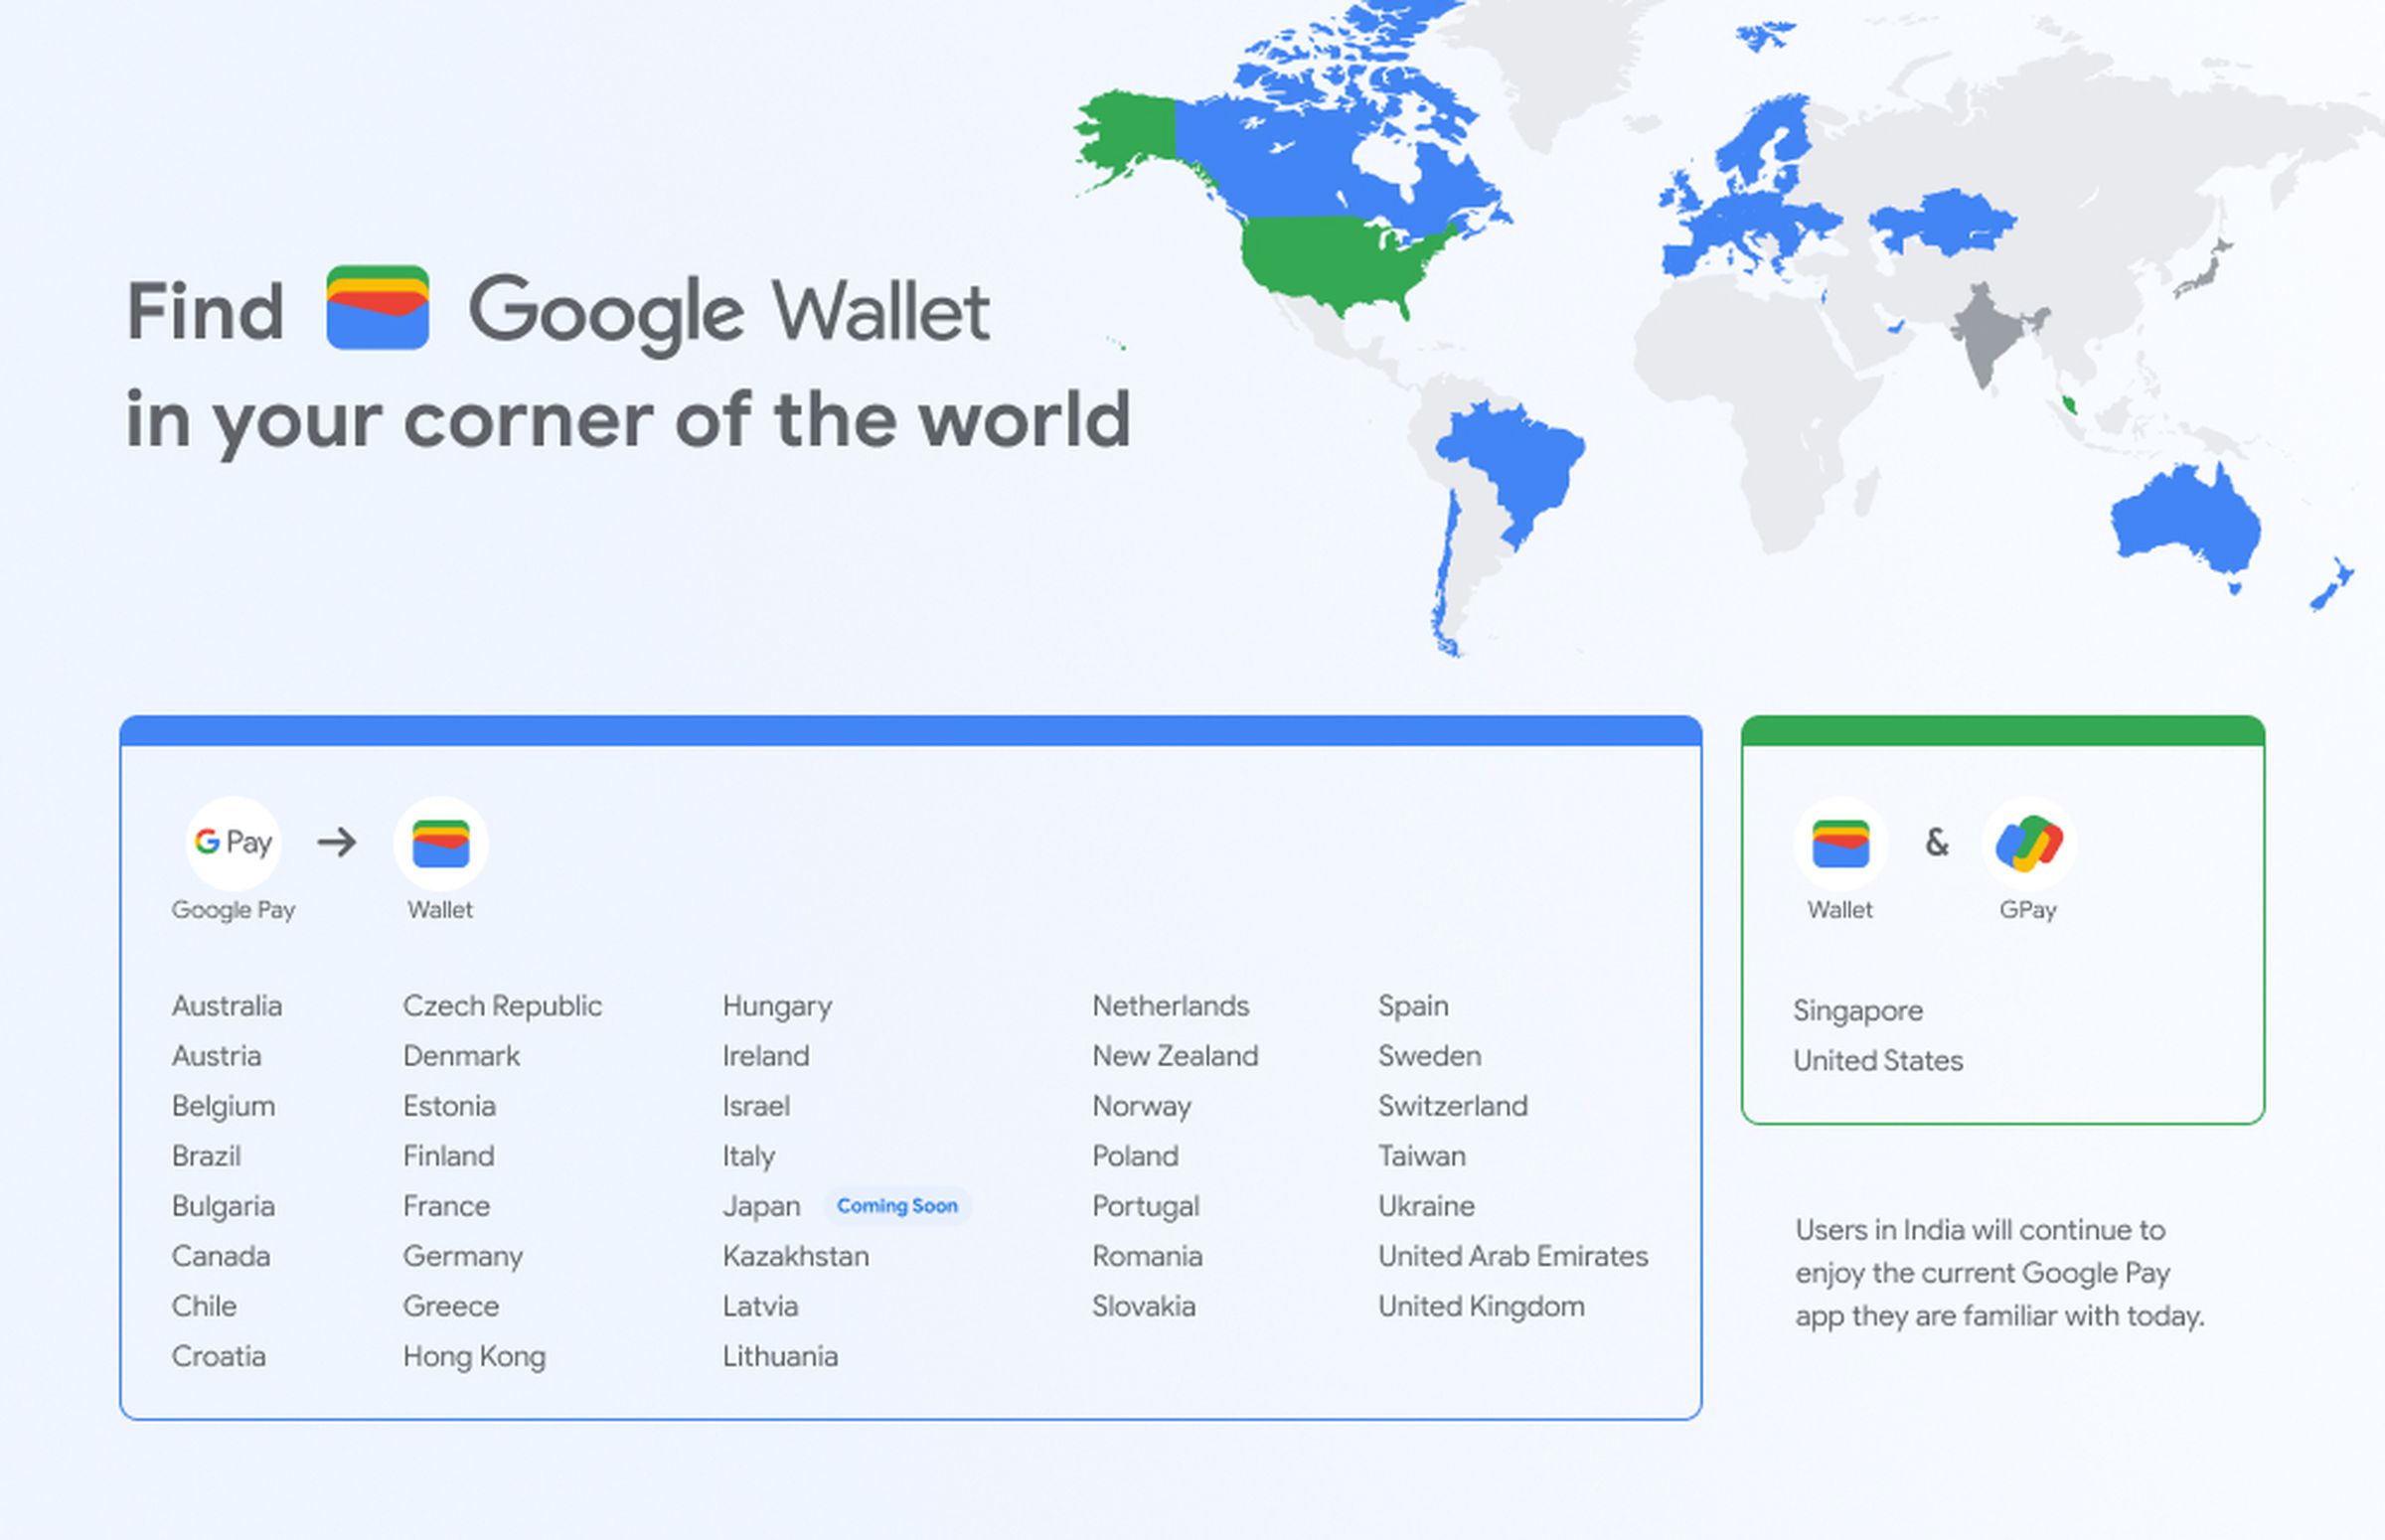 The Google Wallet rollout is a little confusing.